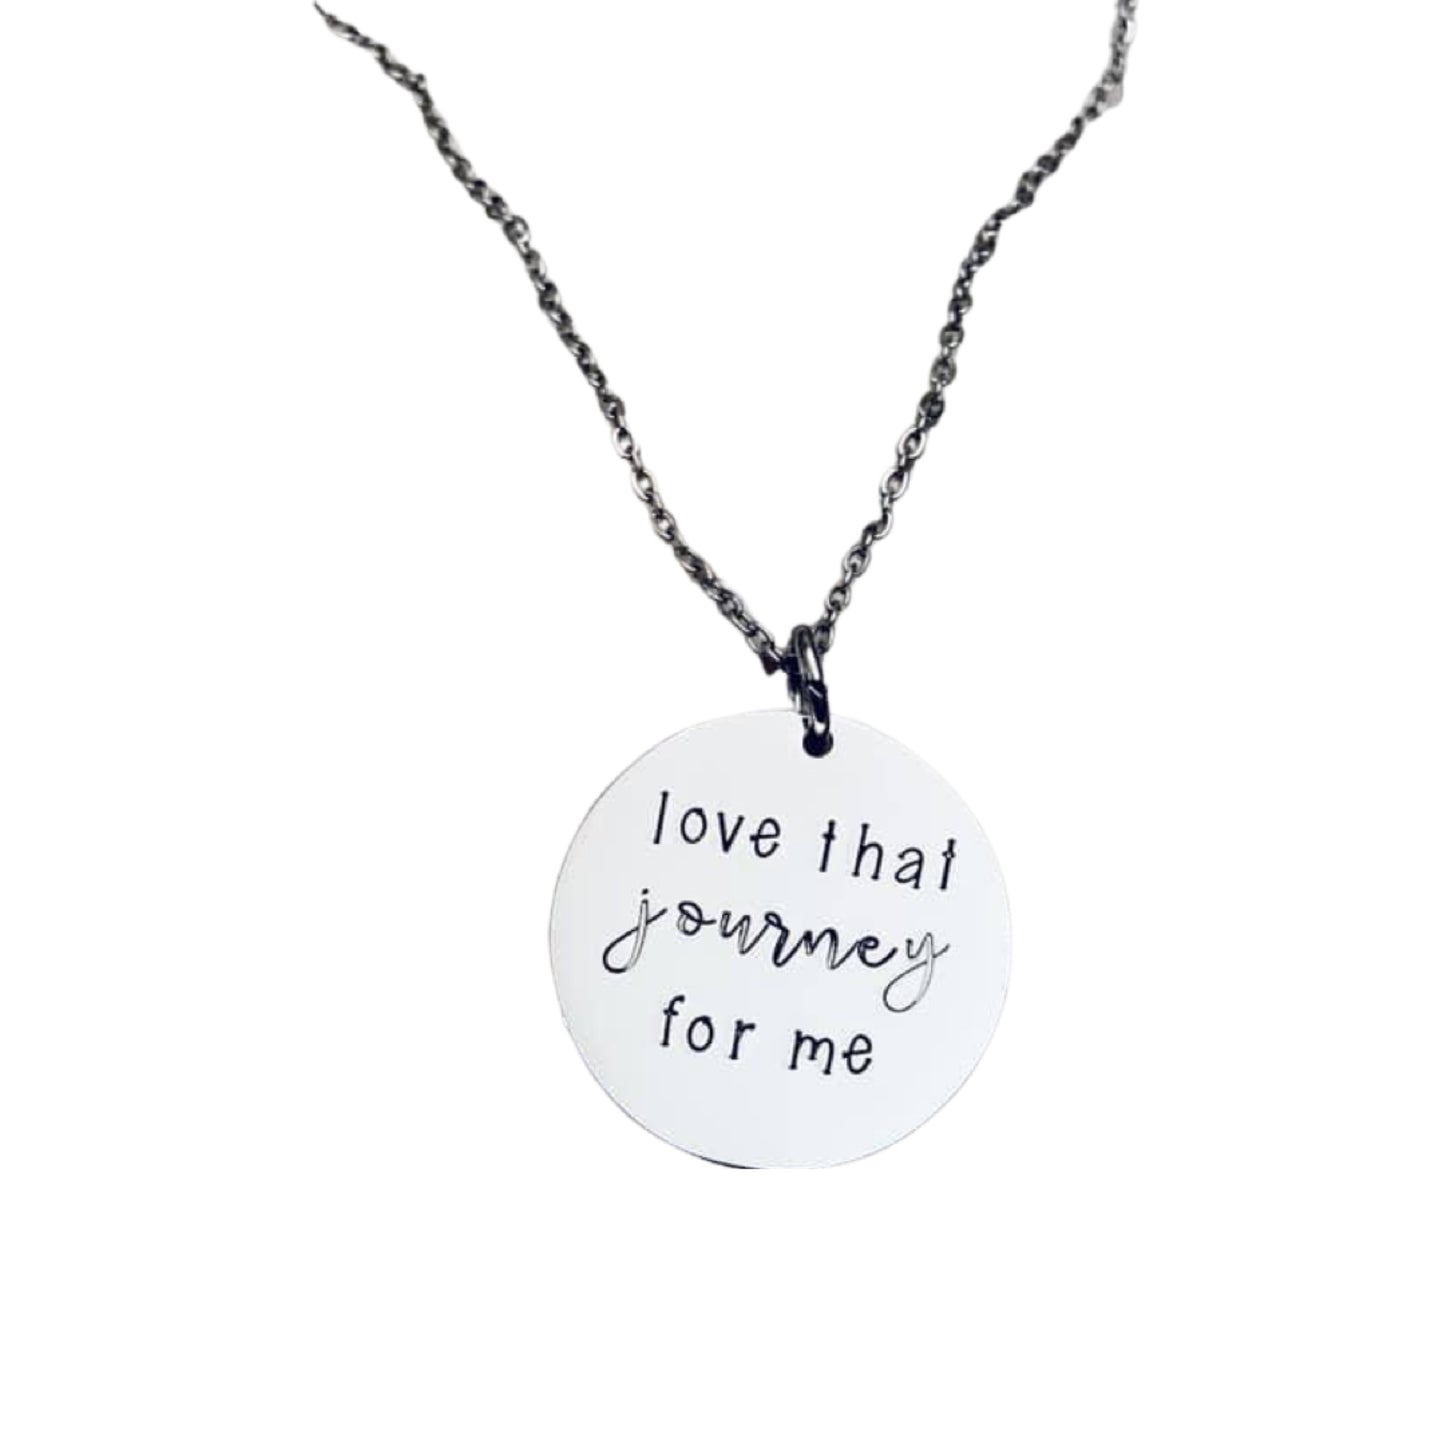 Love that journey for me - Necklace